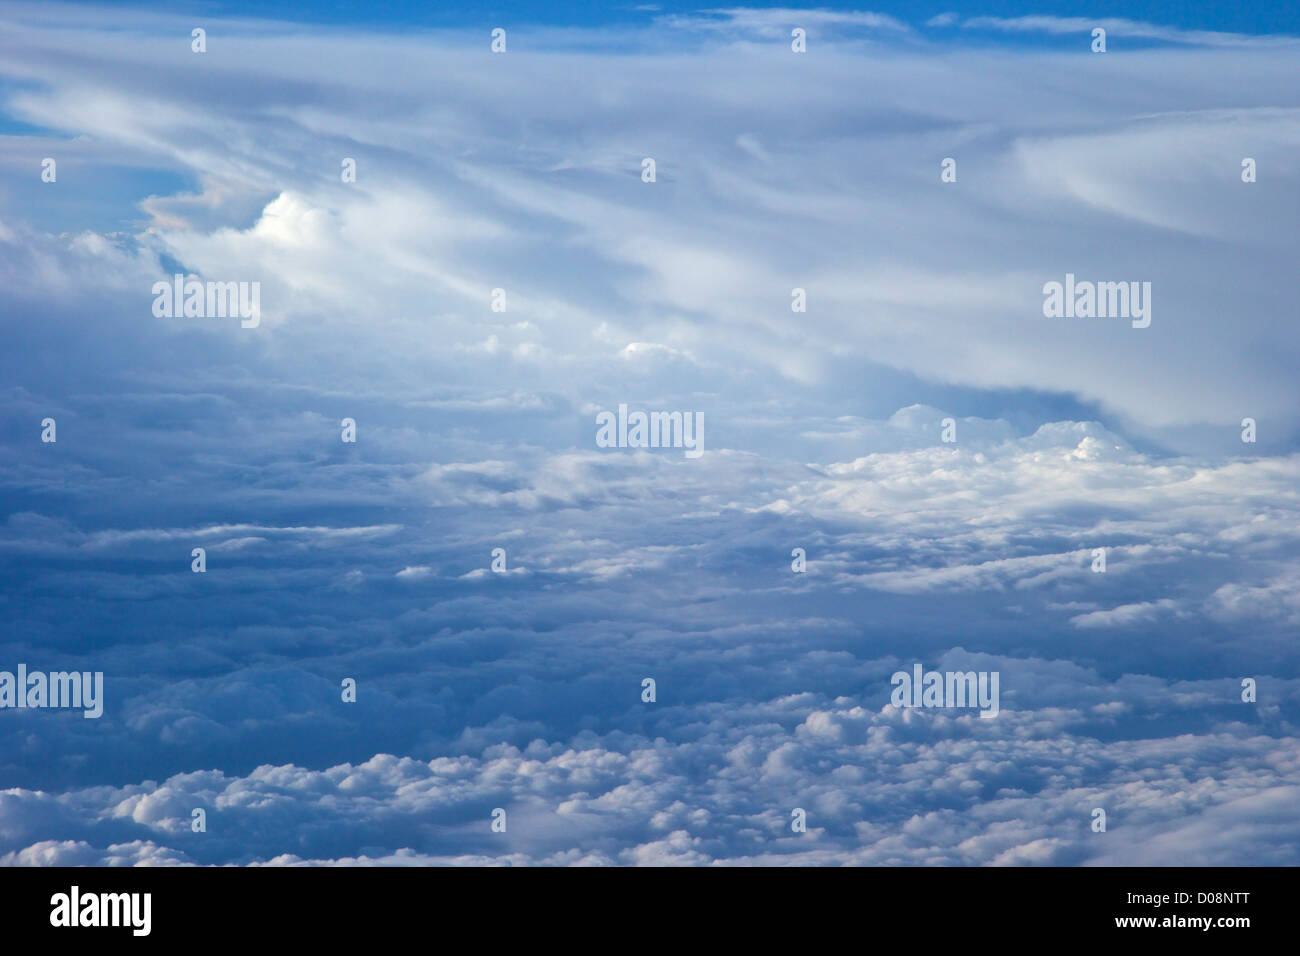 Aerial view of clouds from passenger jet at 30,000 feet Stock Photo